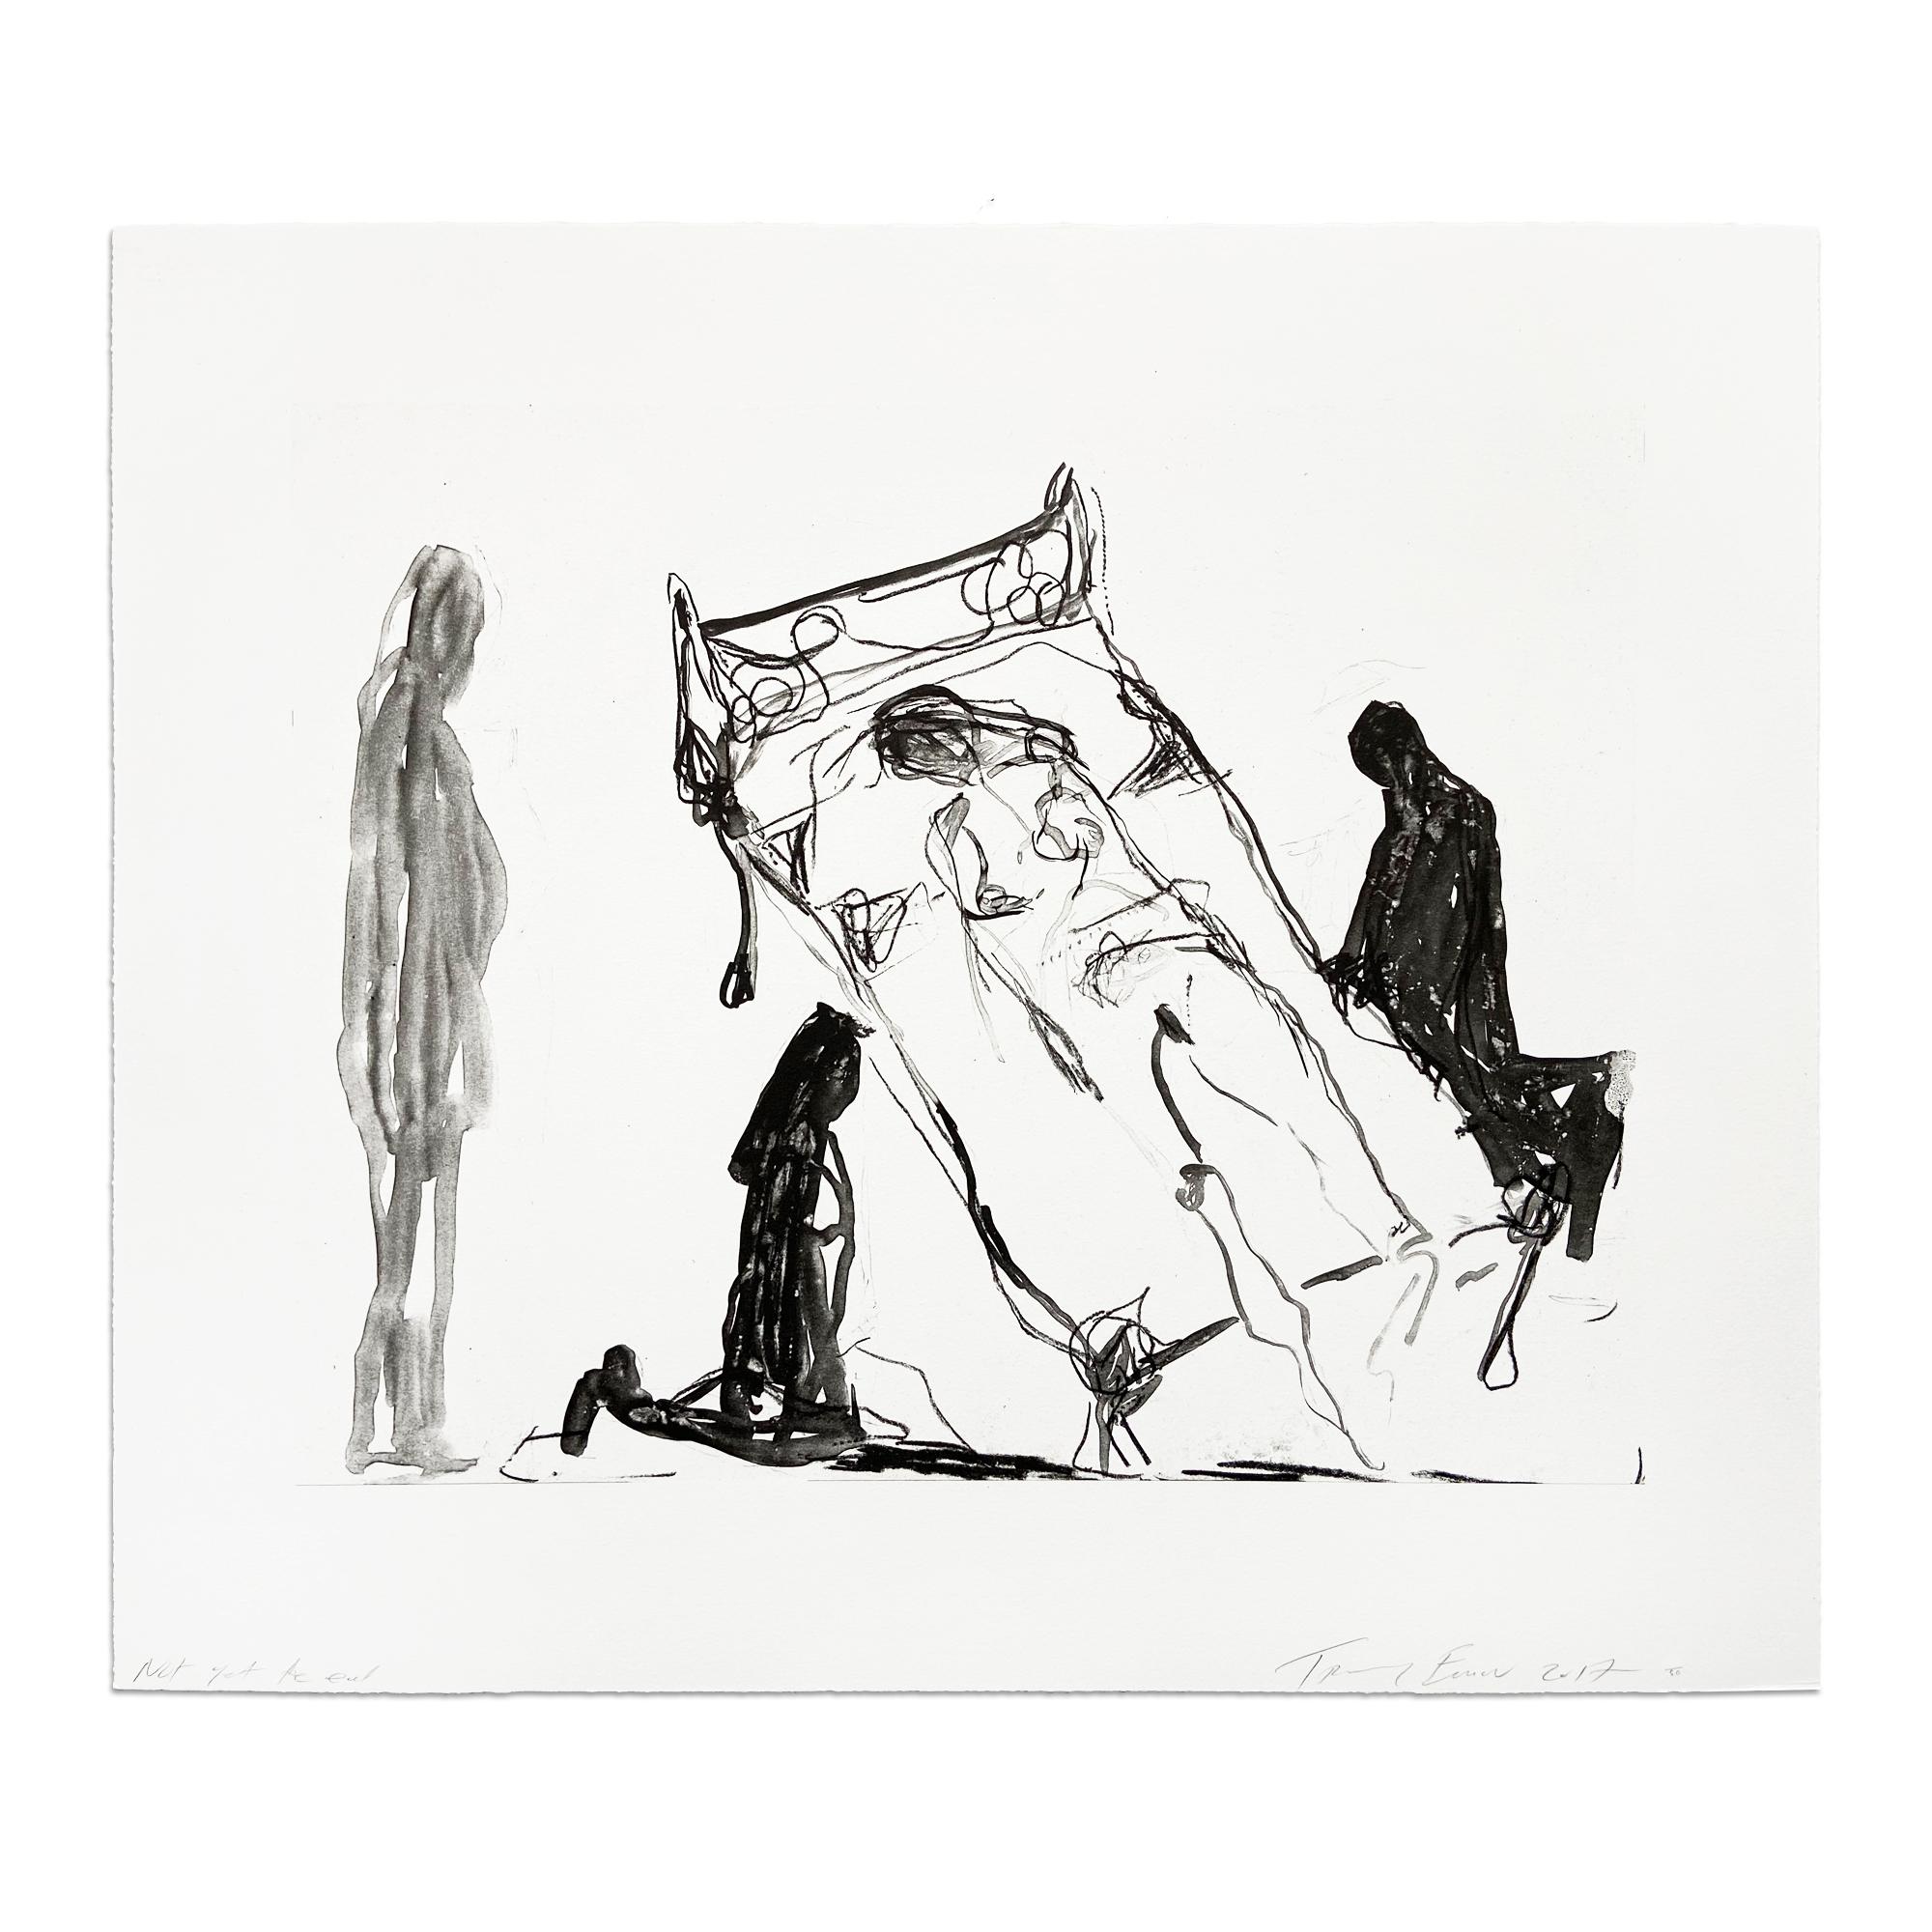 Tracey Emin Figurative Print - Not Yet the End, Contemporary Art, British Artist